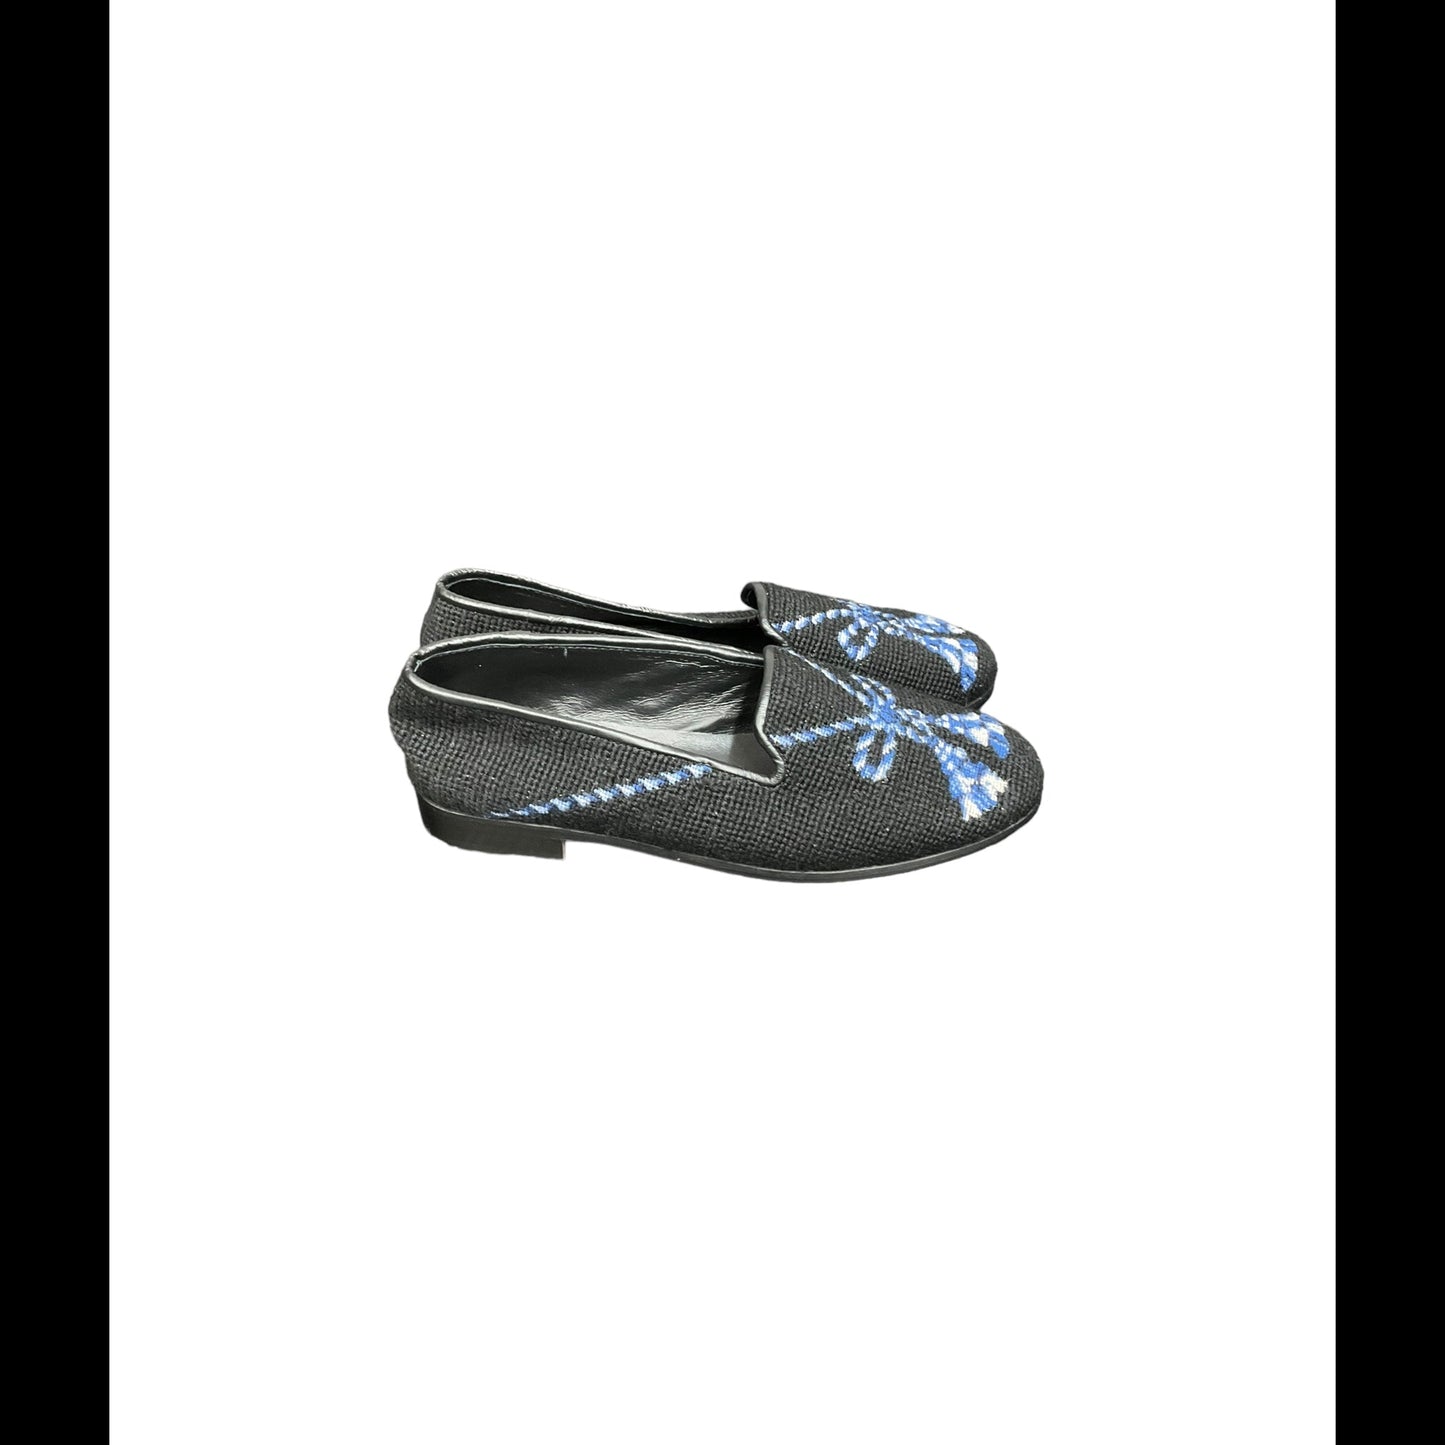 Shoes Flats By Cma  Size: 9